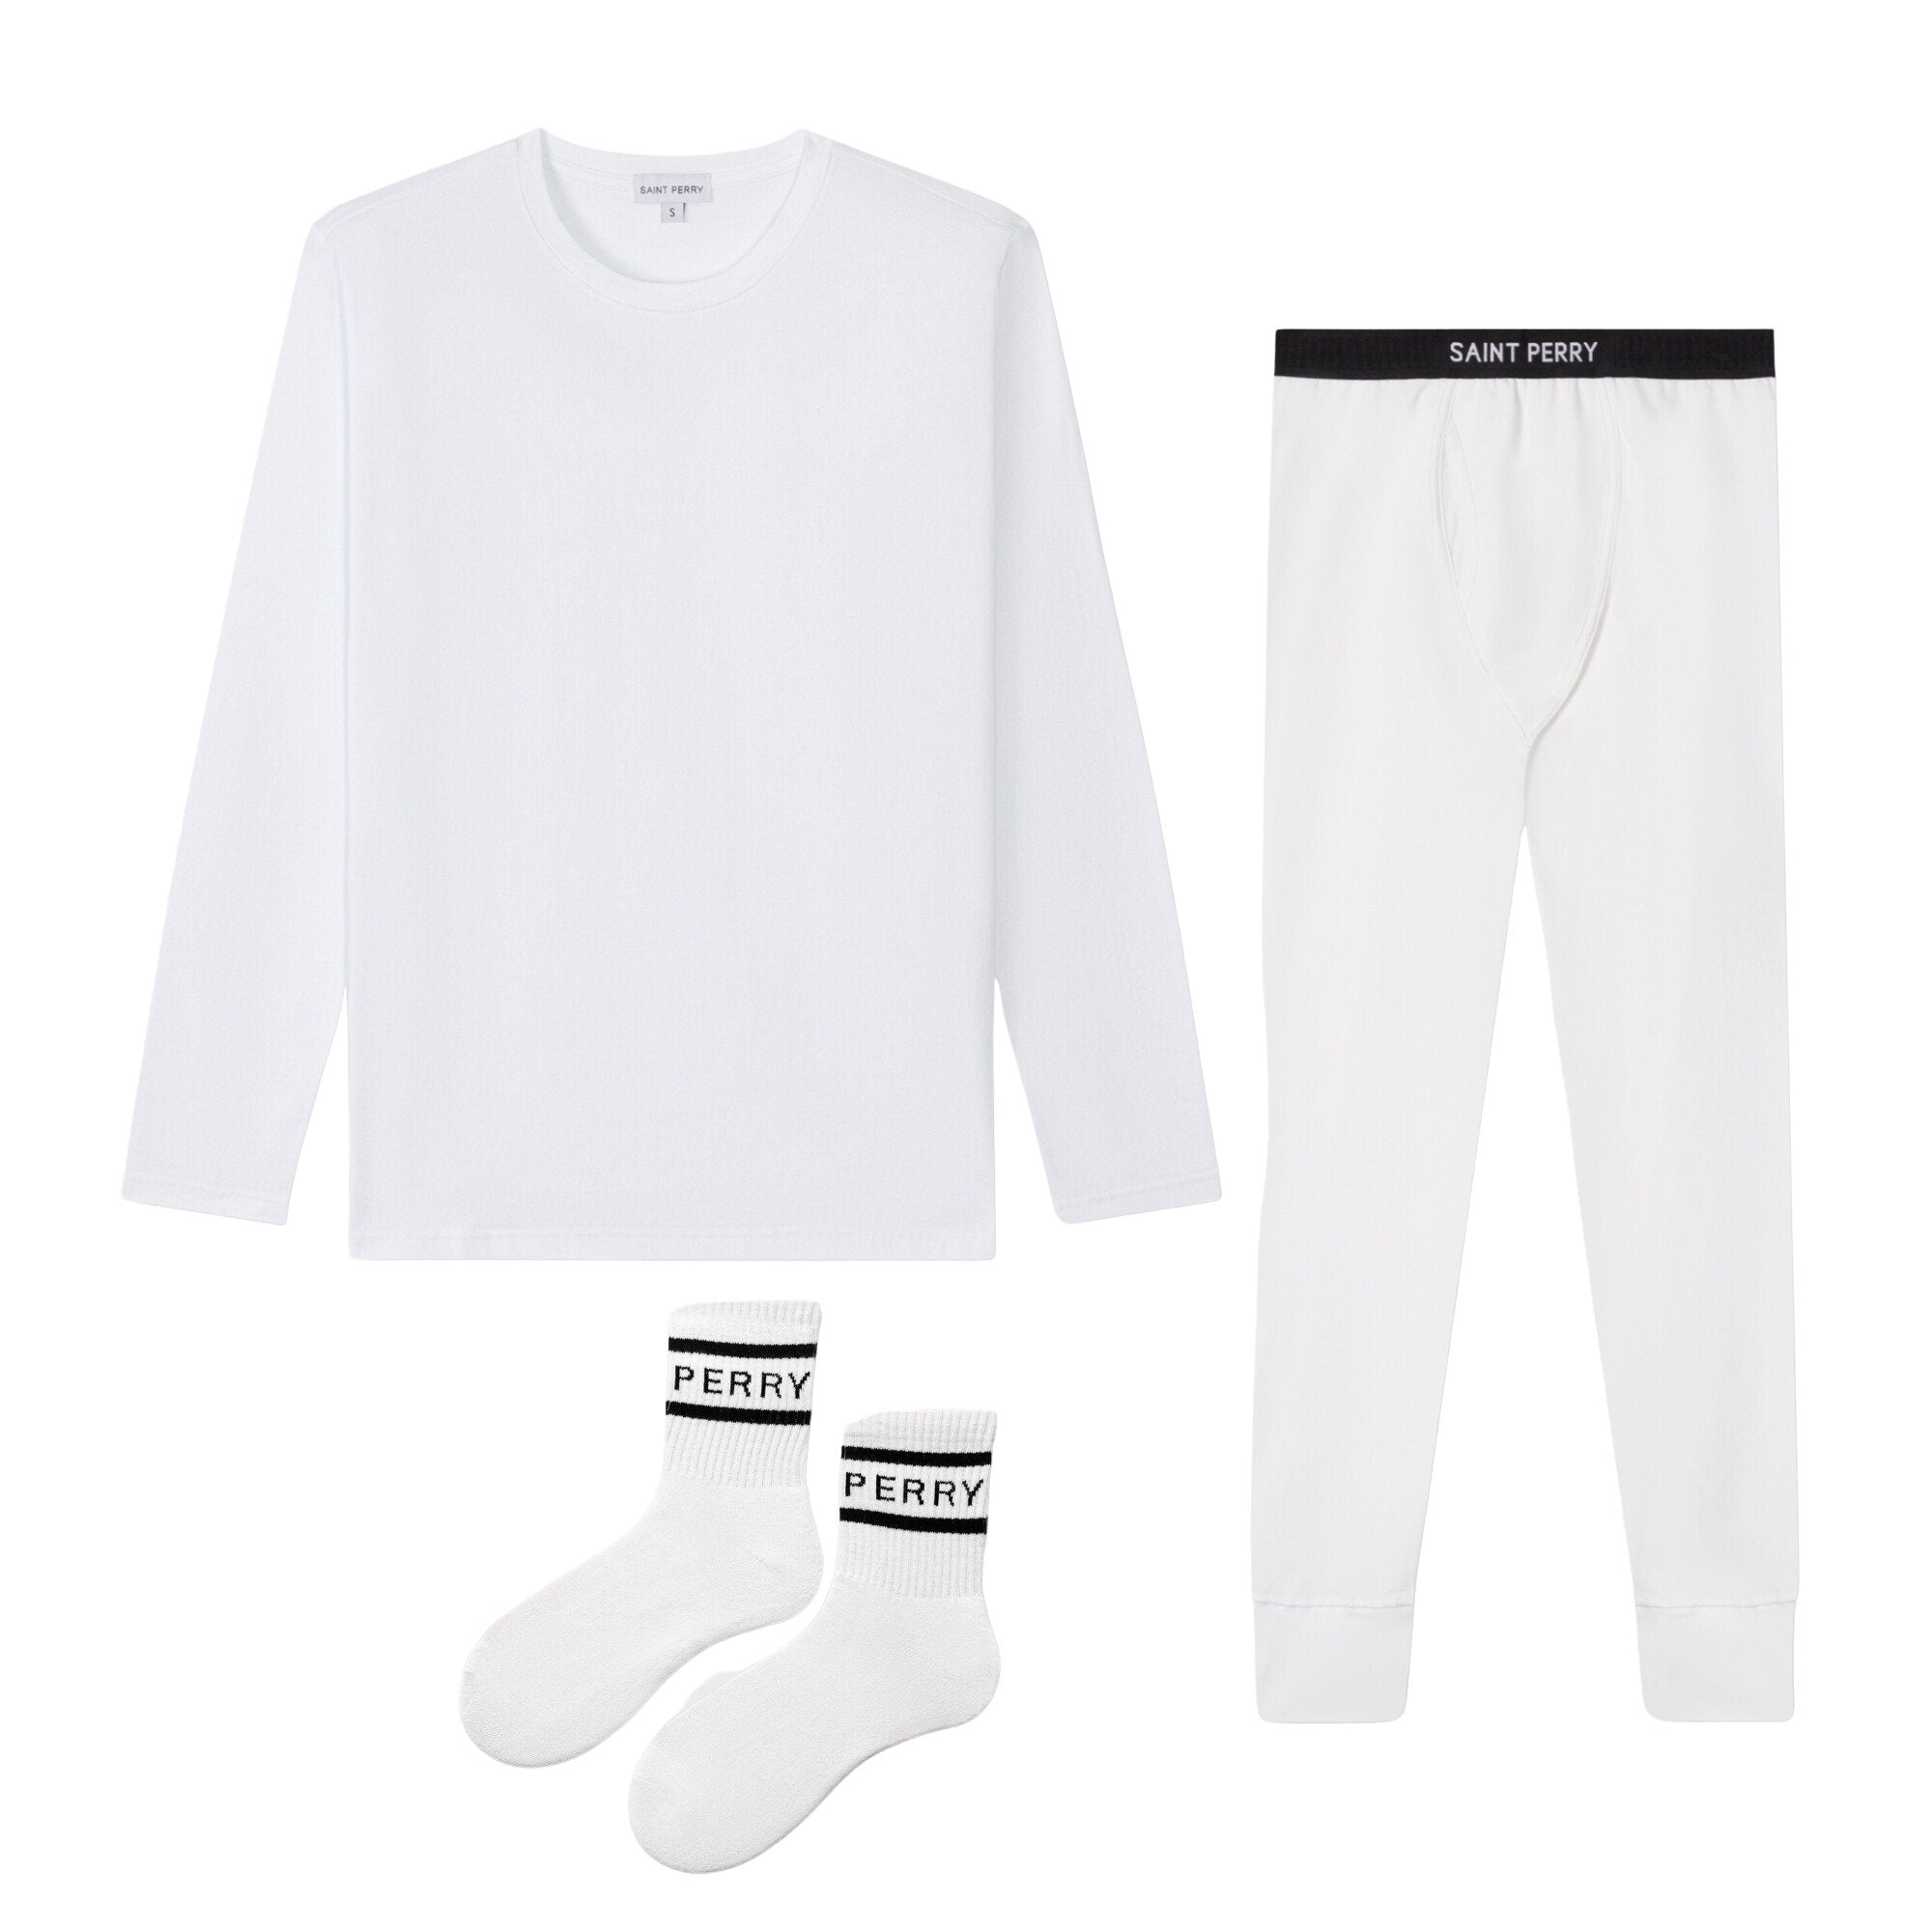 SP Thermal White Sets - SAINT PERRY